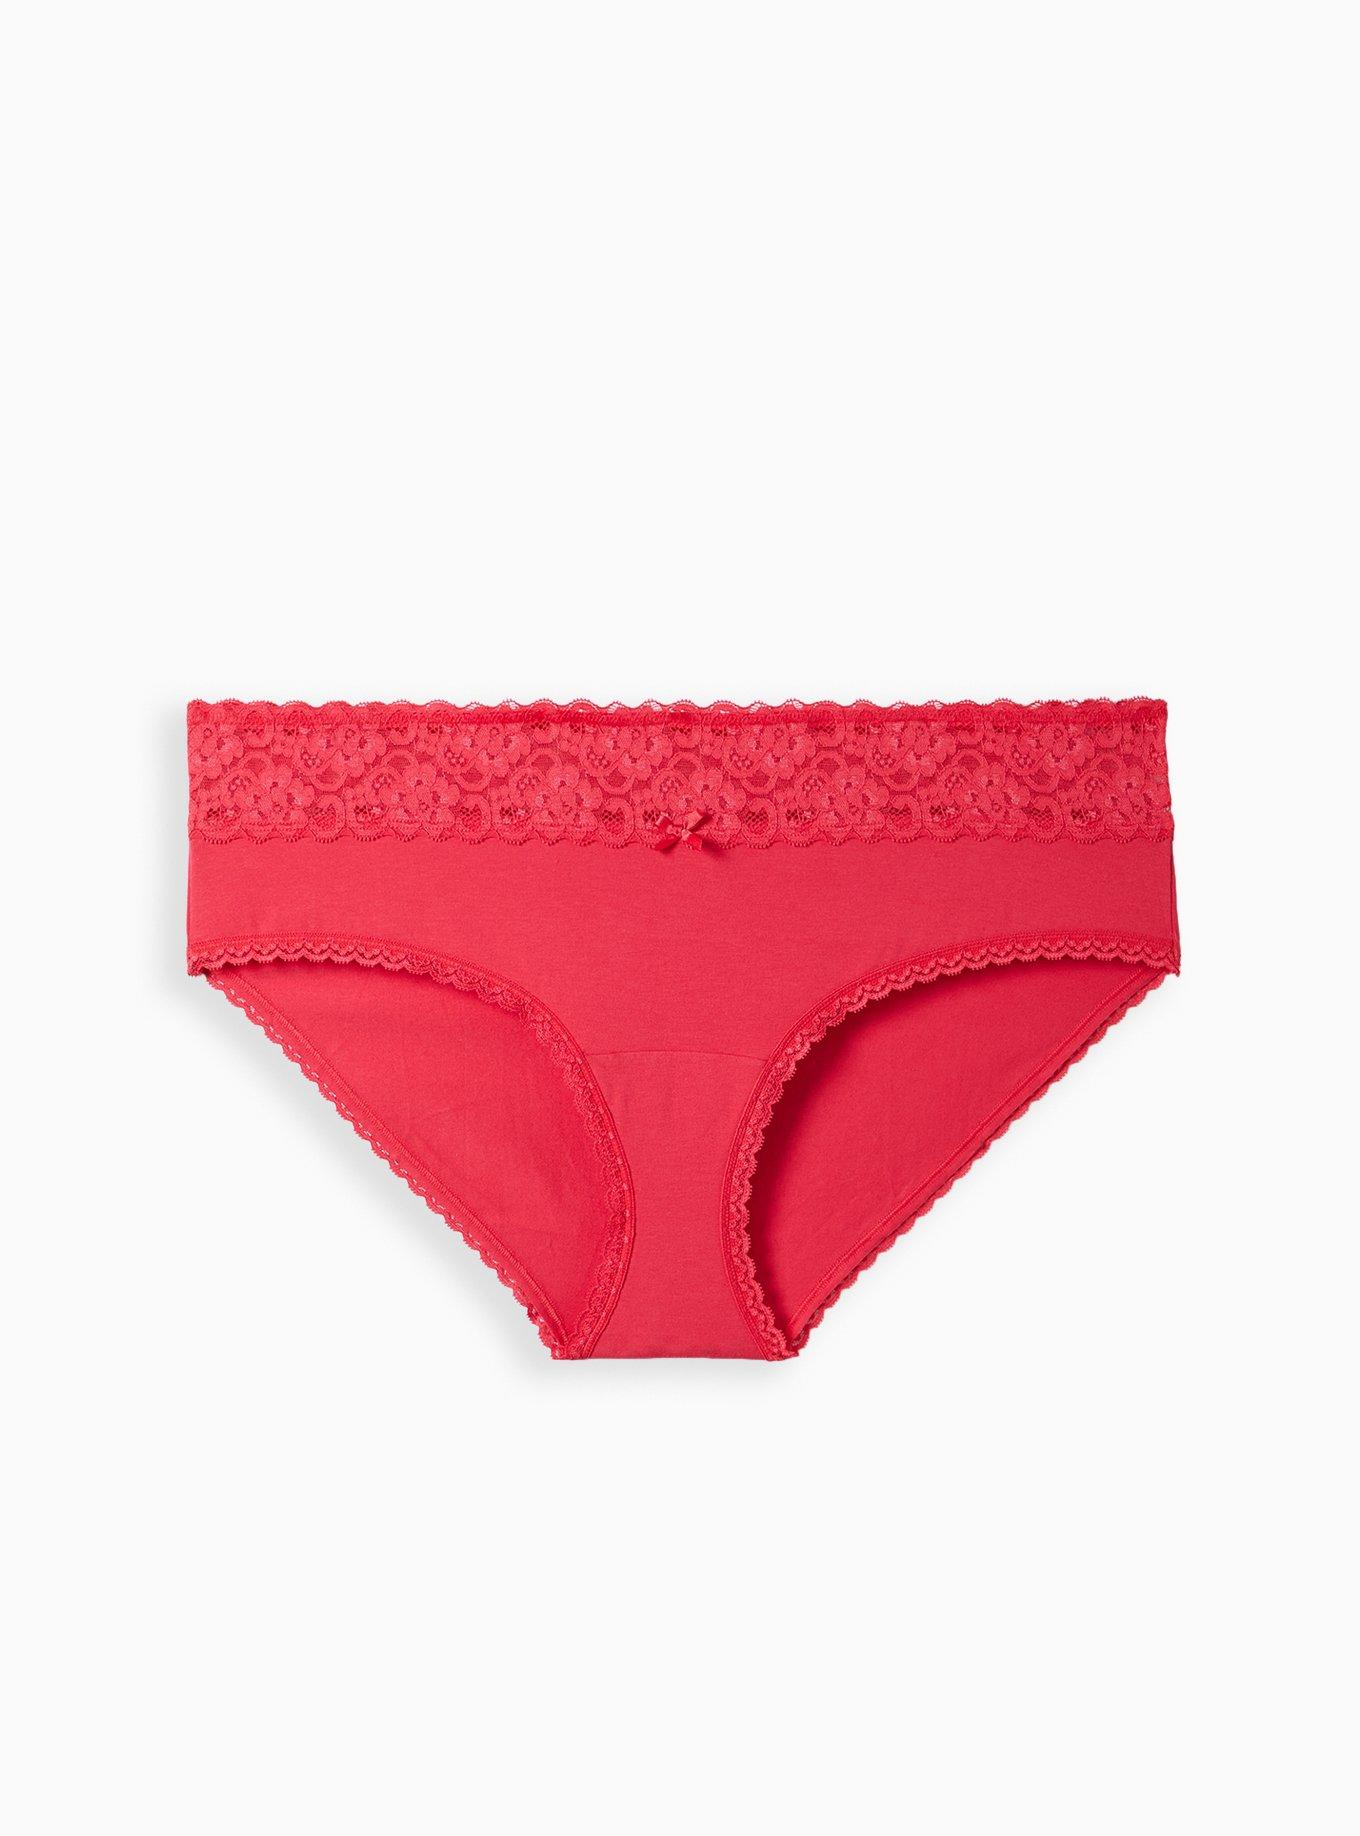 Buy Victoria's Secret The Lacie Cheeky Panty Set of 3, Navy / Sage